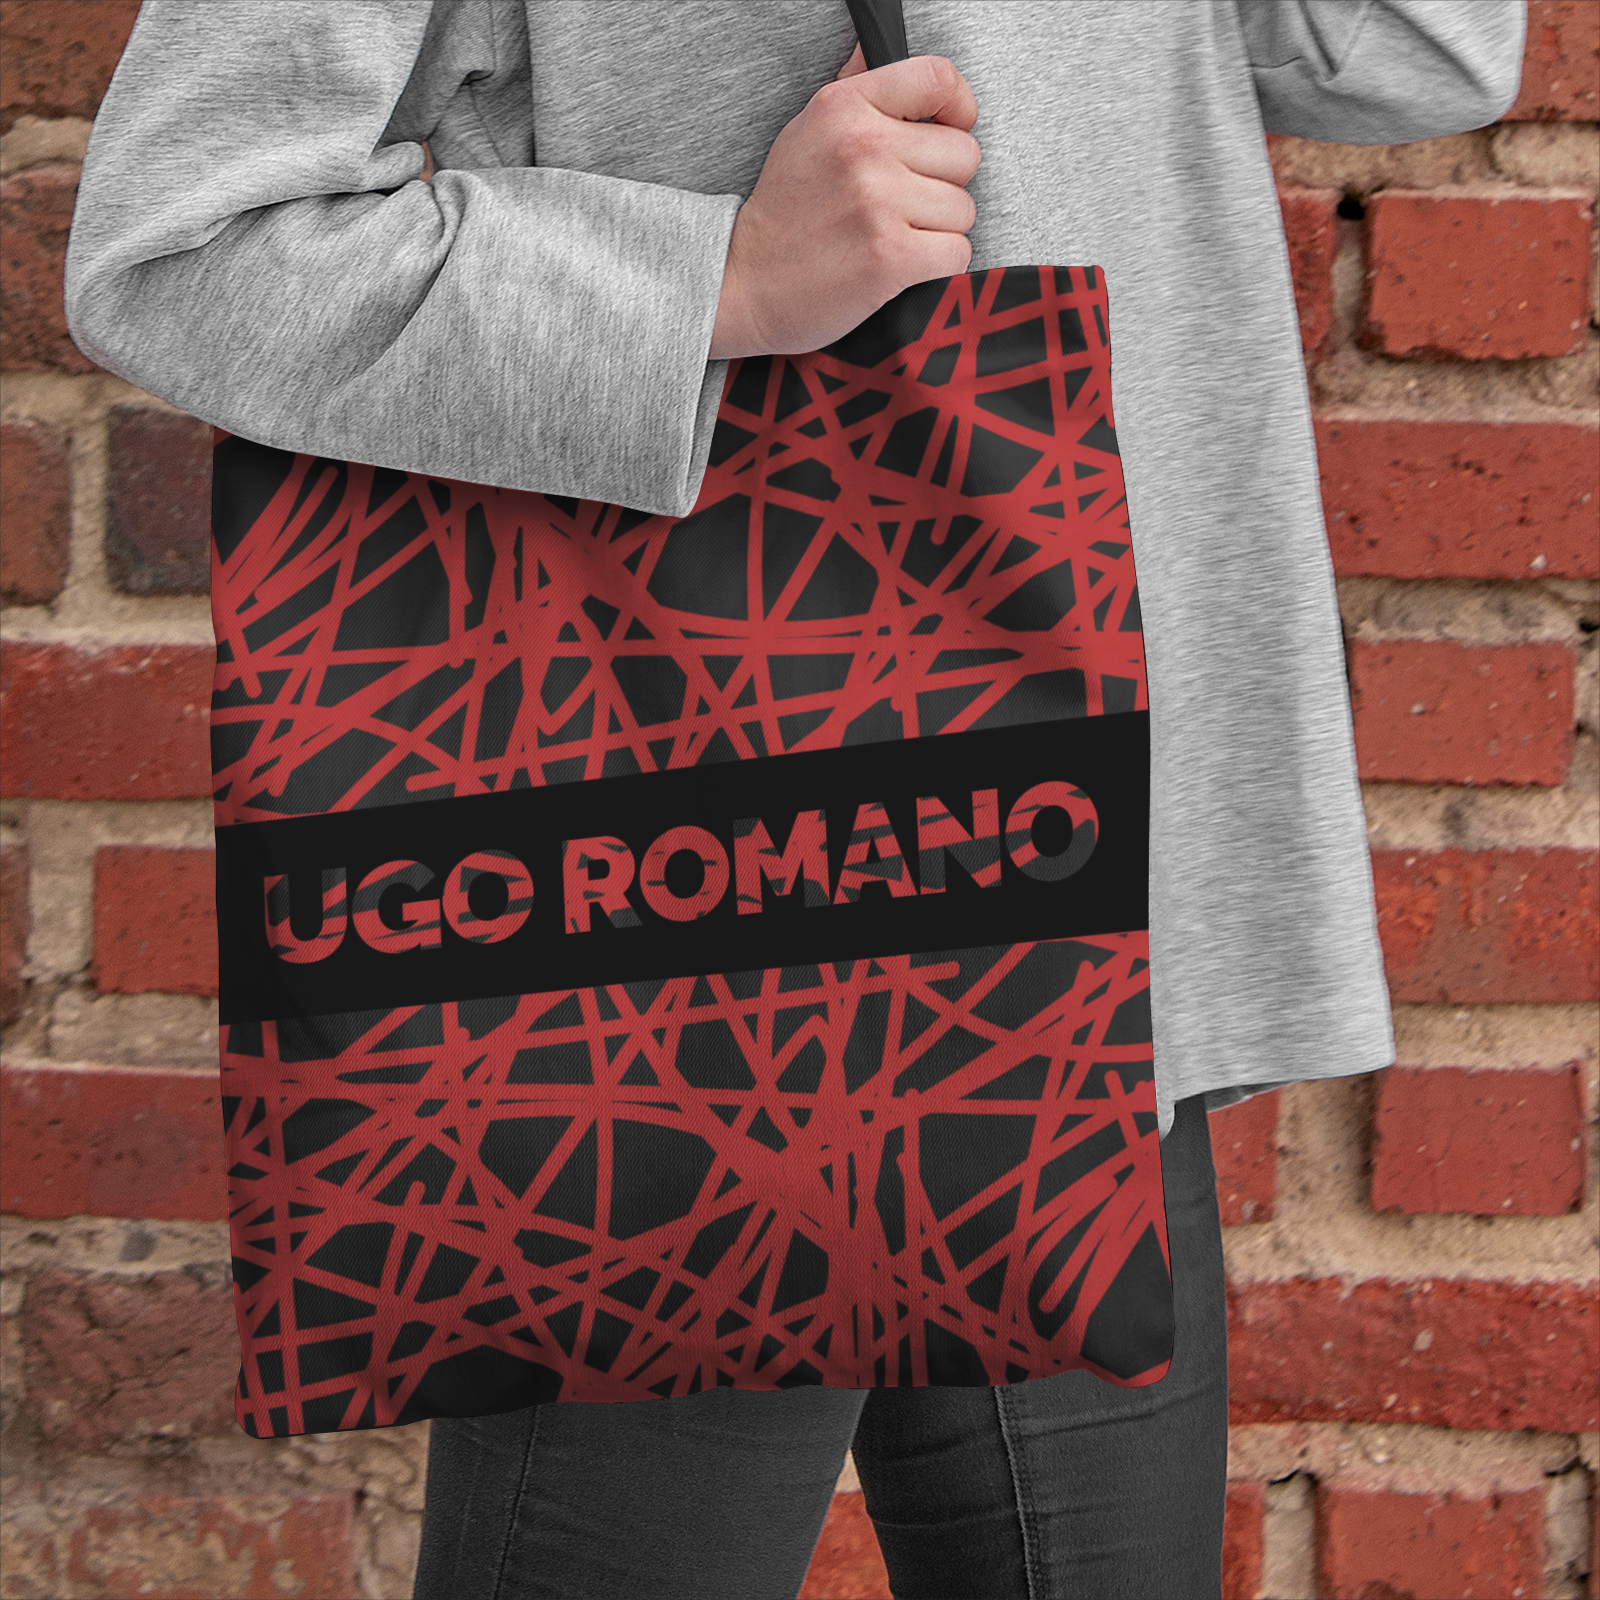 Heavy Duty and Strong Natural Cotton Canvas Tote Bag - UGO ROMANO URTB029